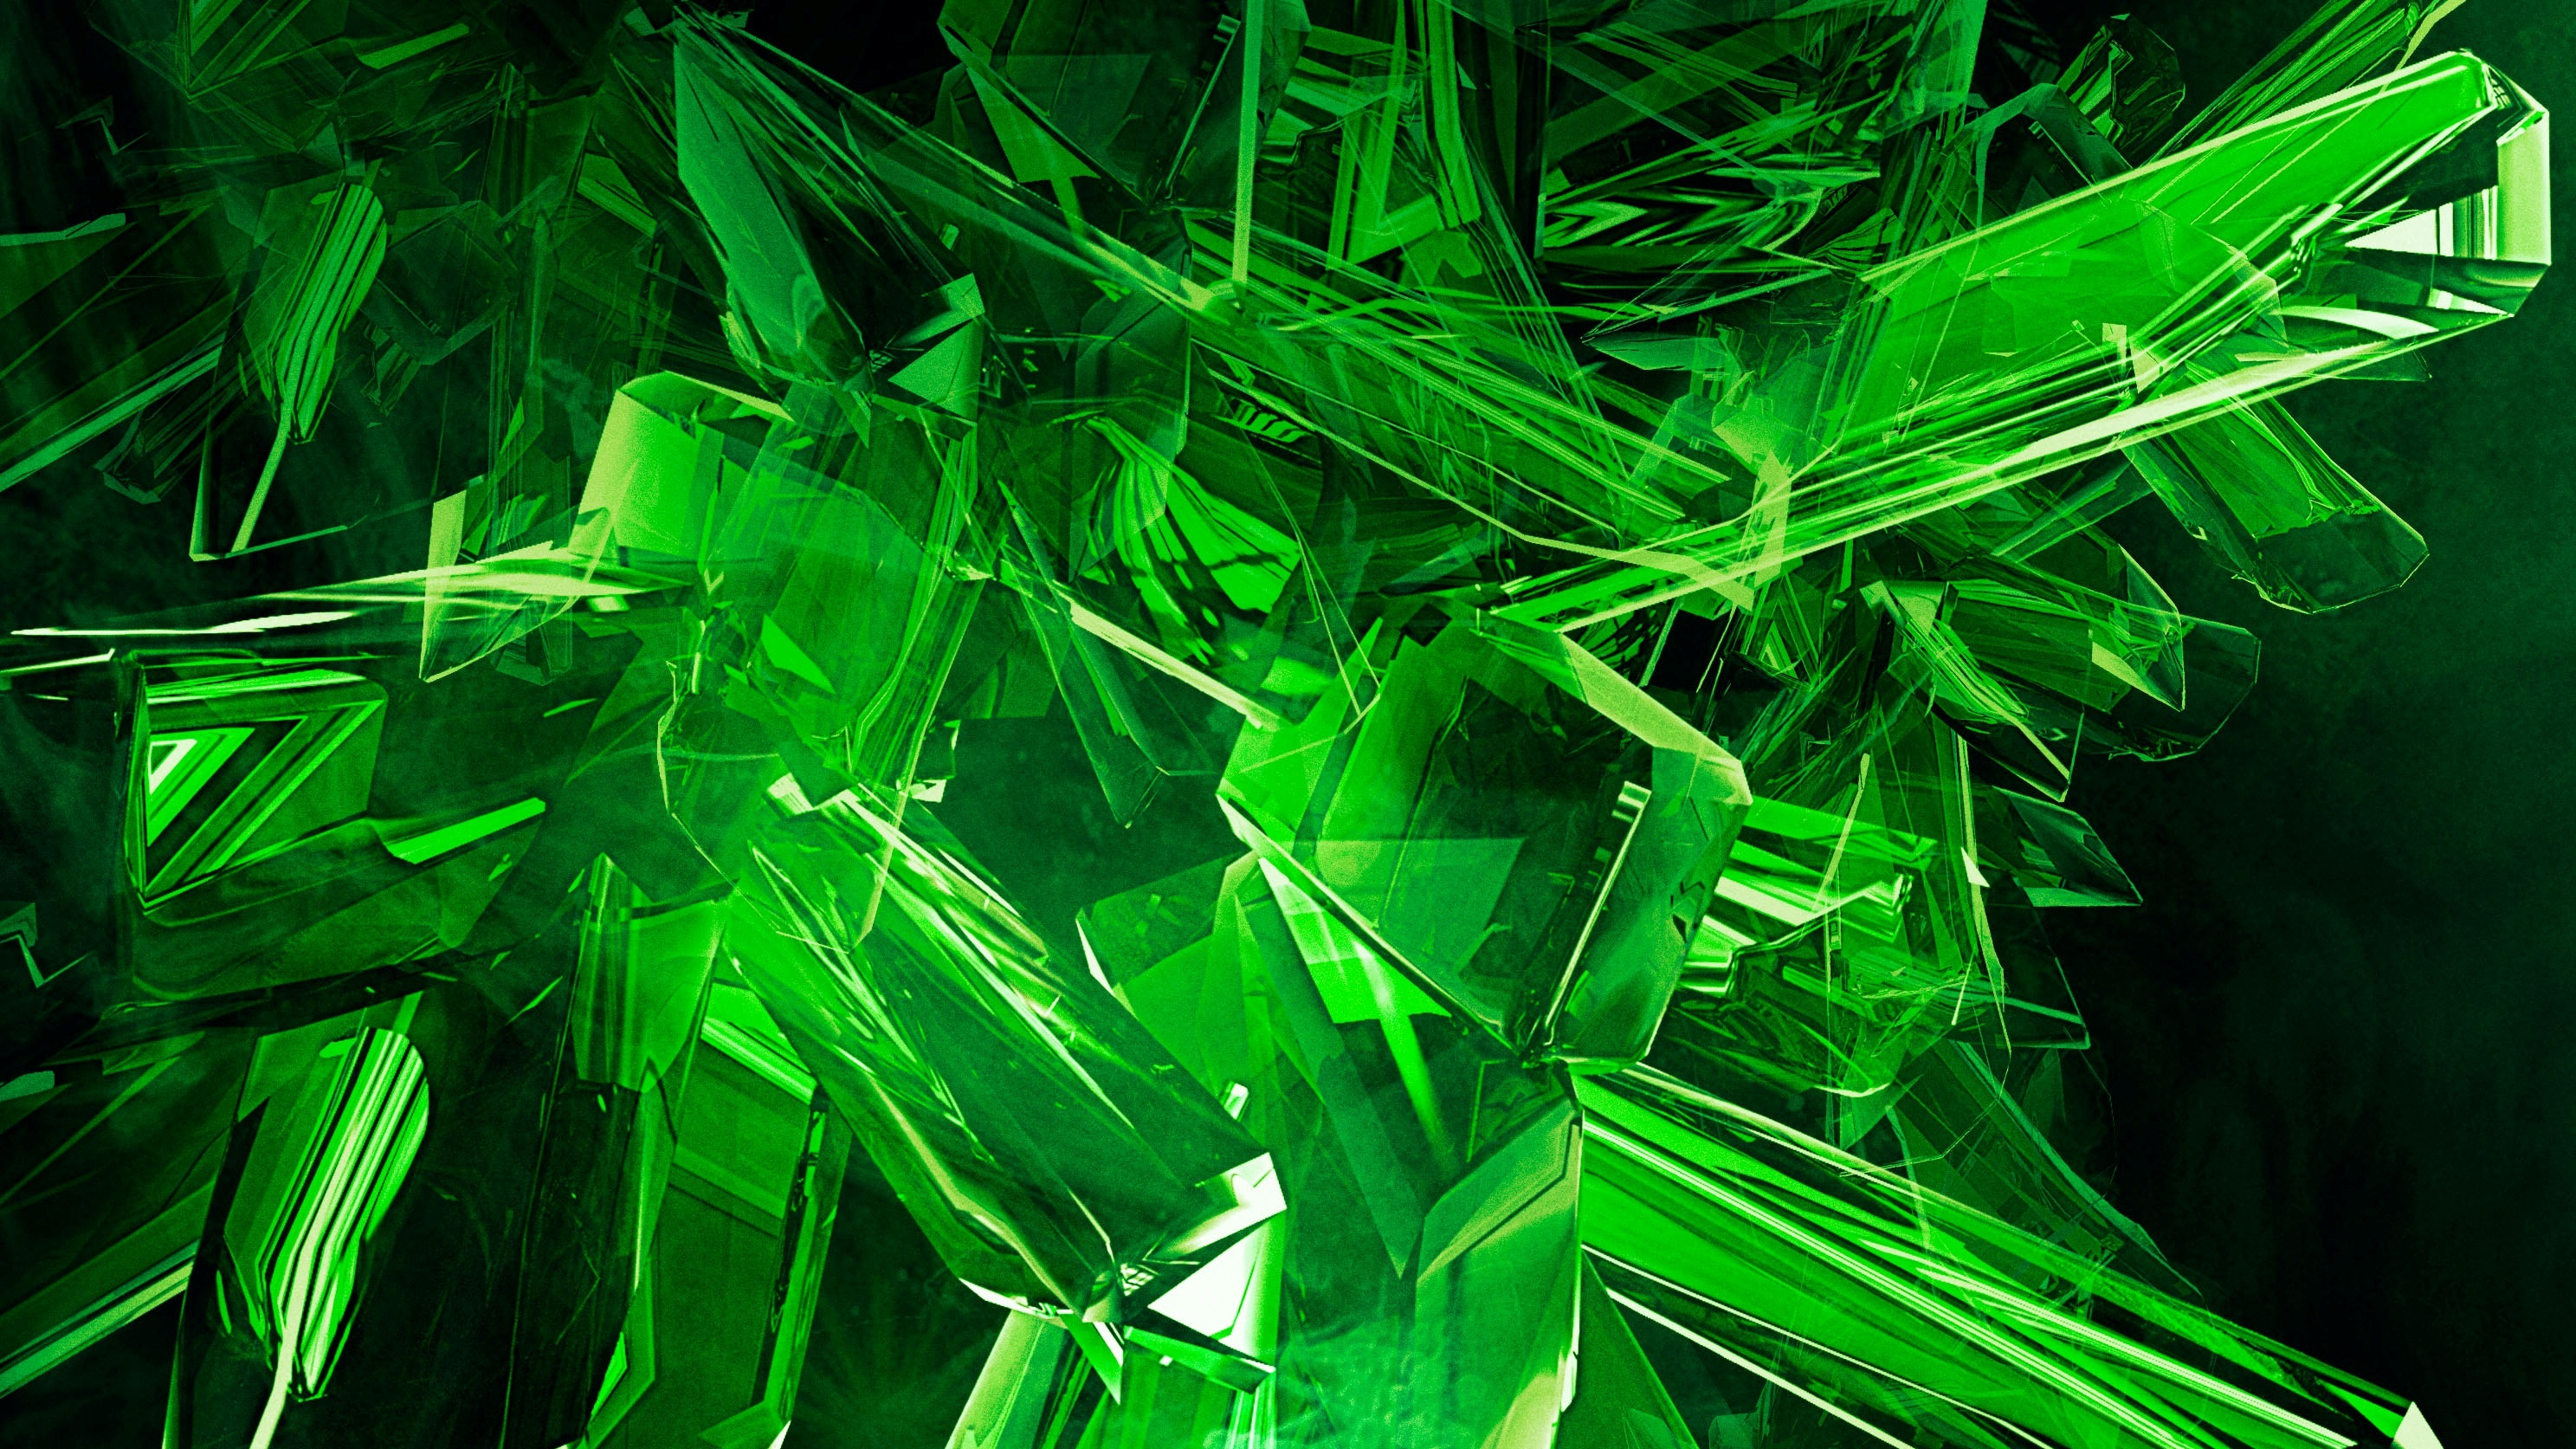  hd wallpaper 14591 Image Green View Abstract Gems Cool HD Wallpapers